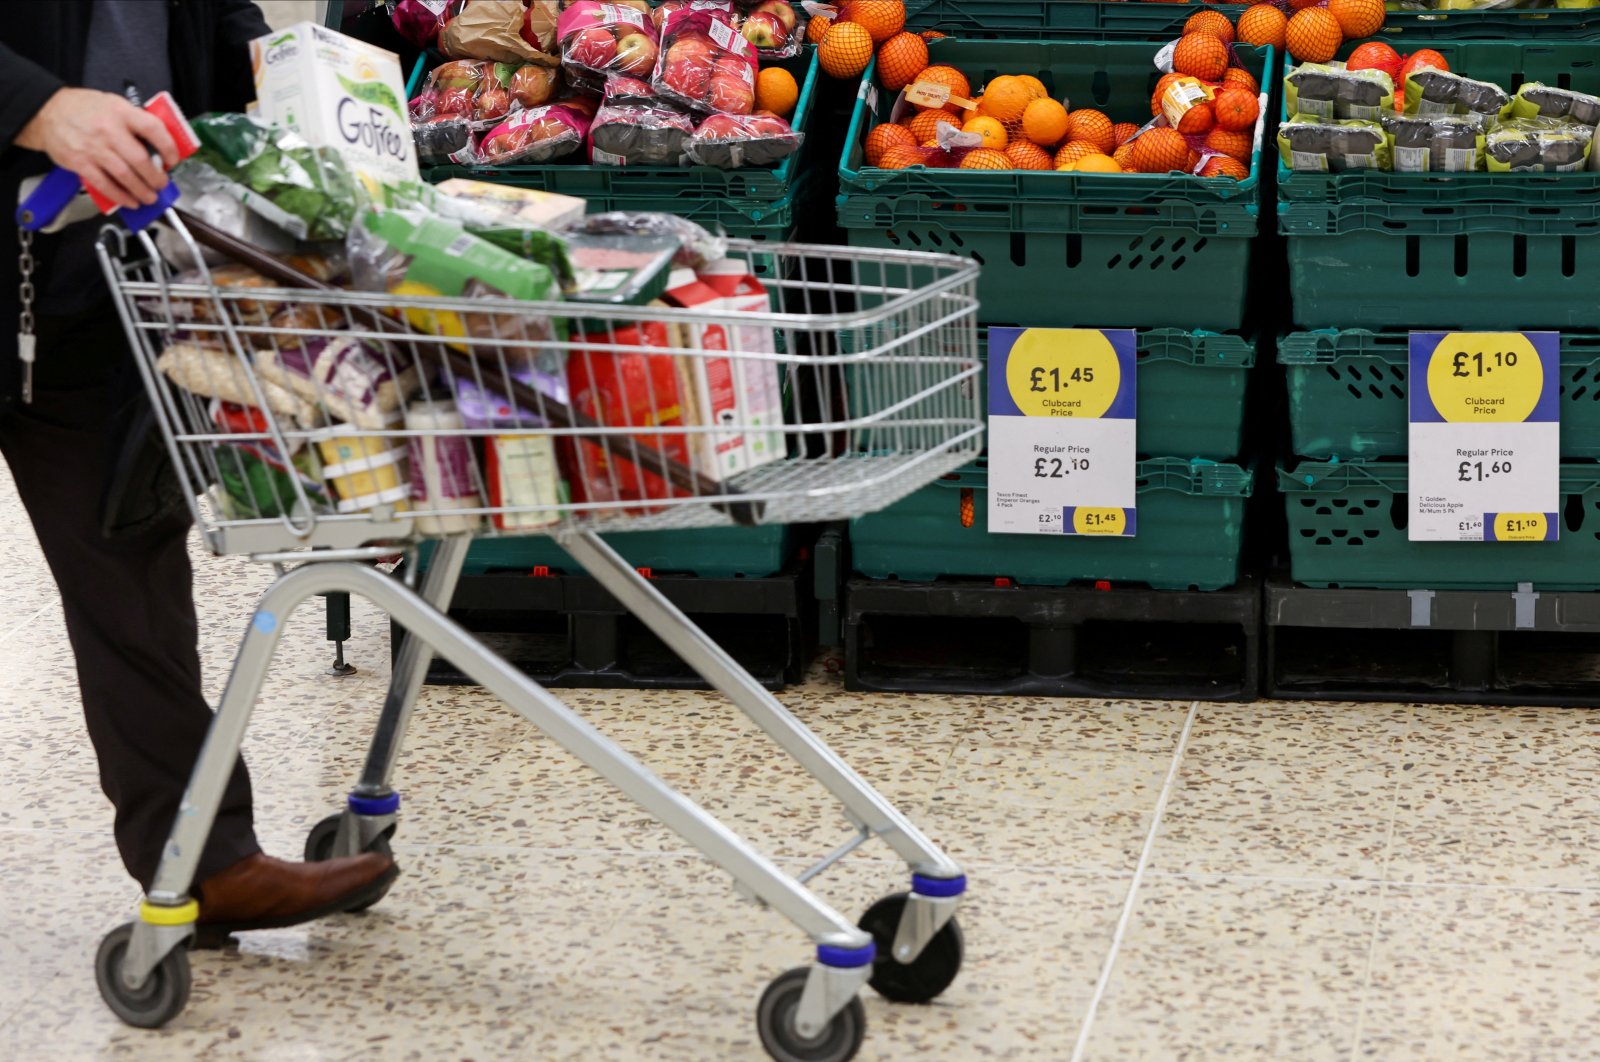 A person pushes a shopping cart inside a branch of a Tesco supermarket in London, Britain, Feb. 10, 2022. (Reuters Photo)